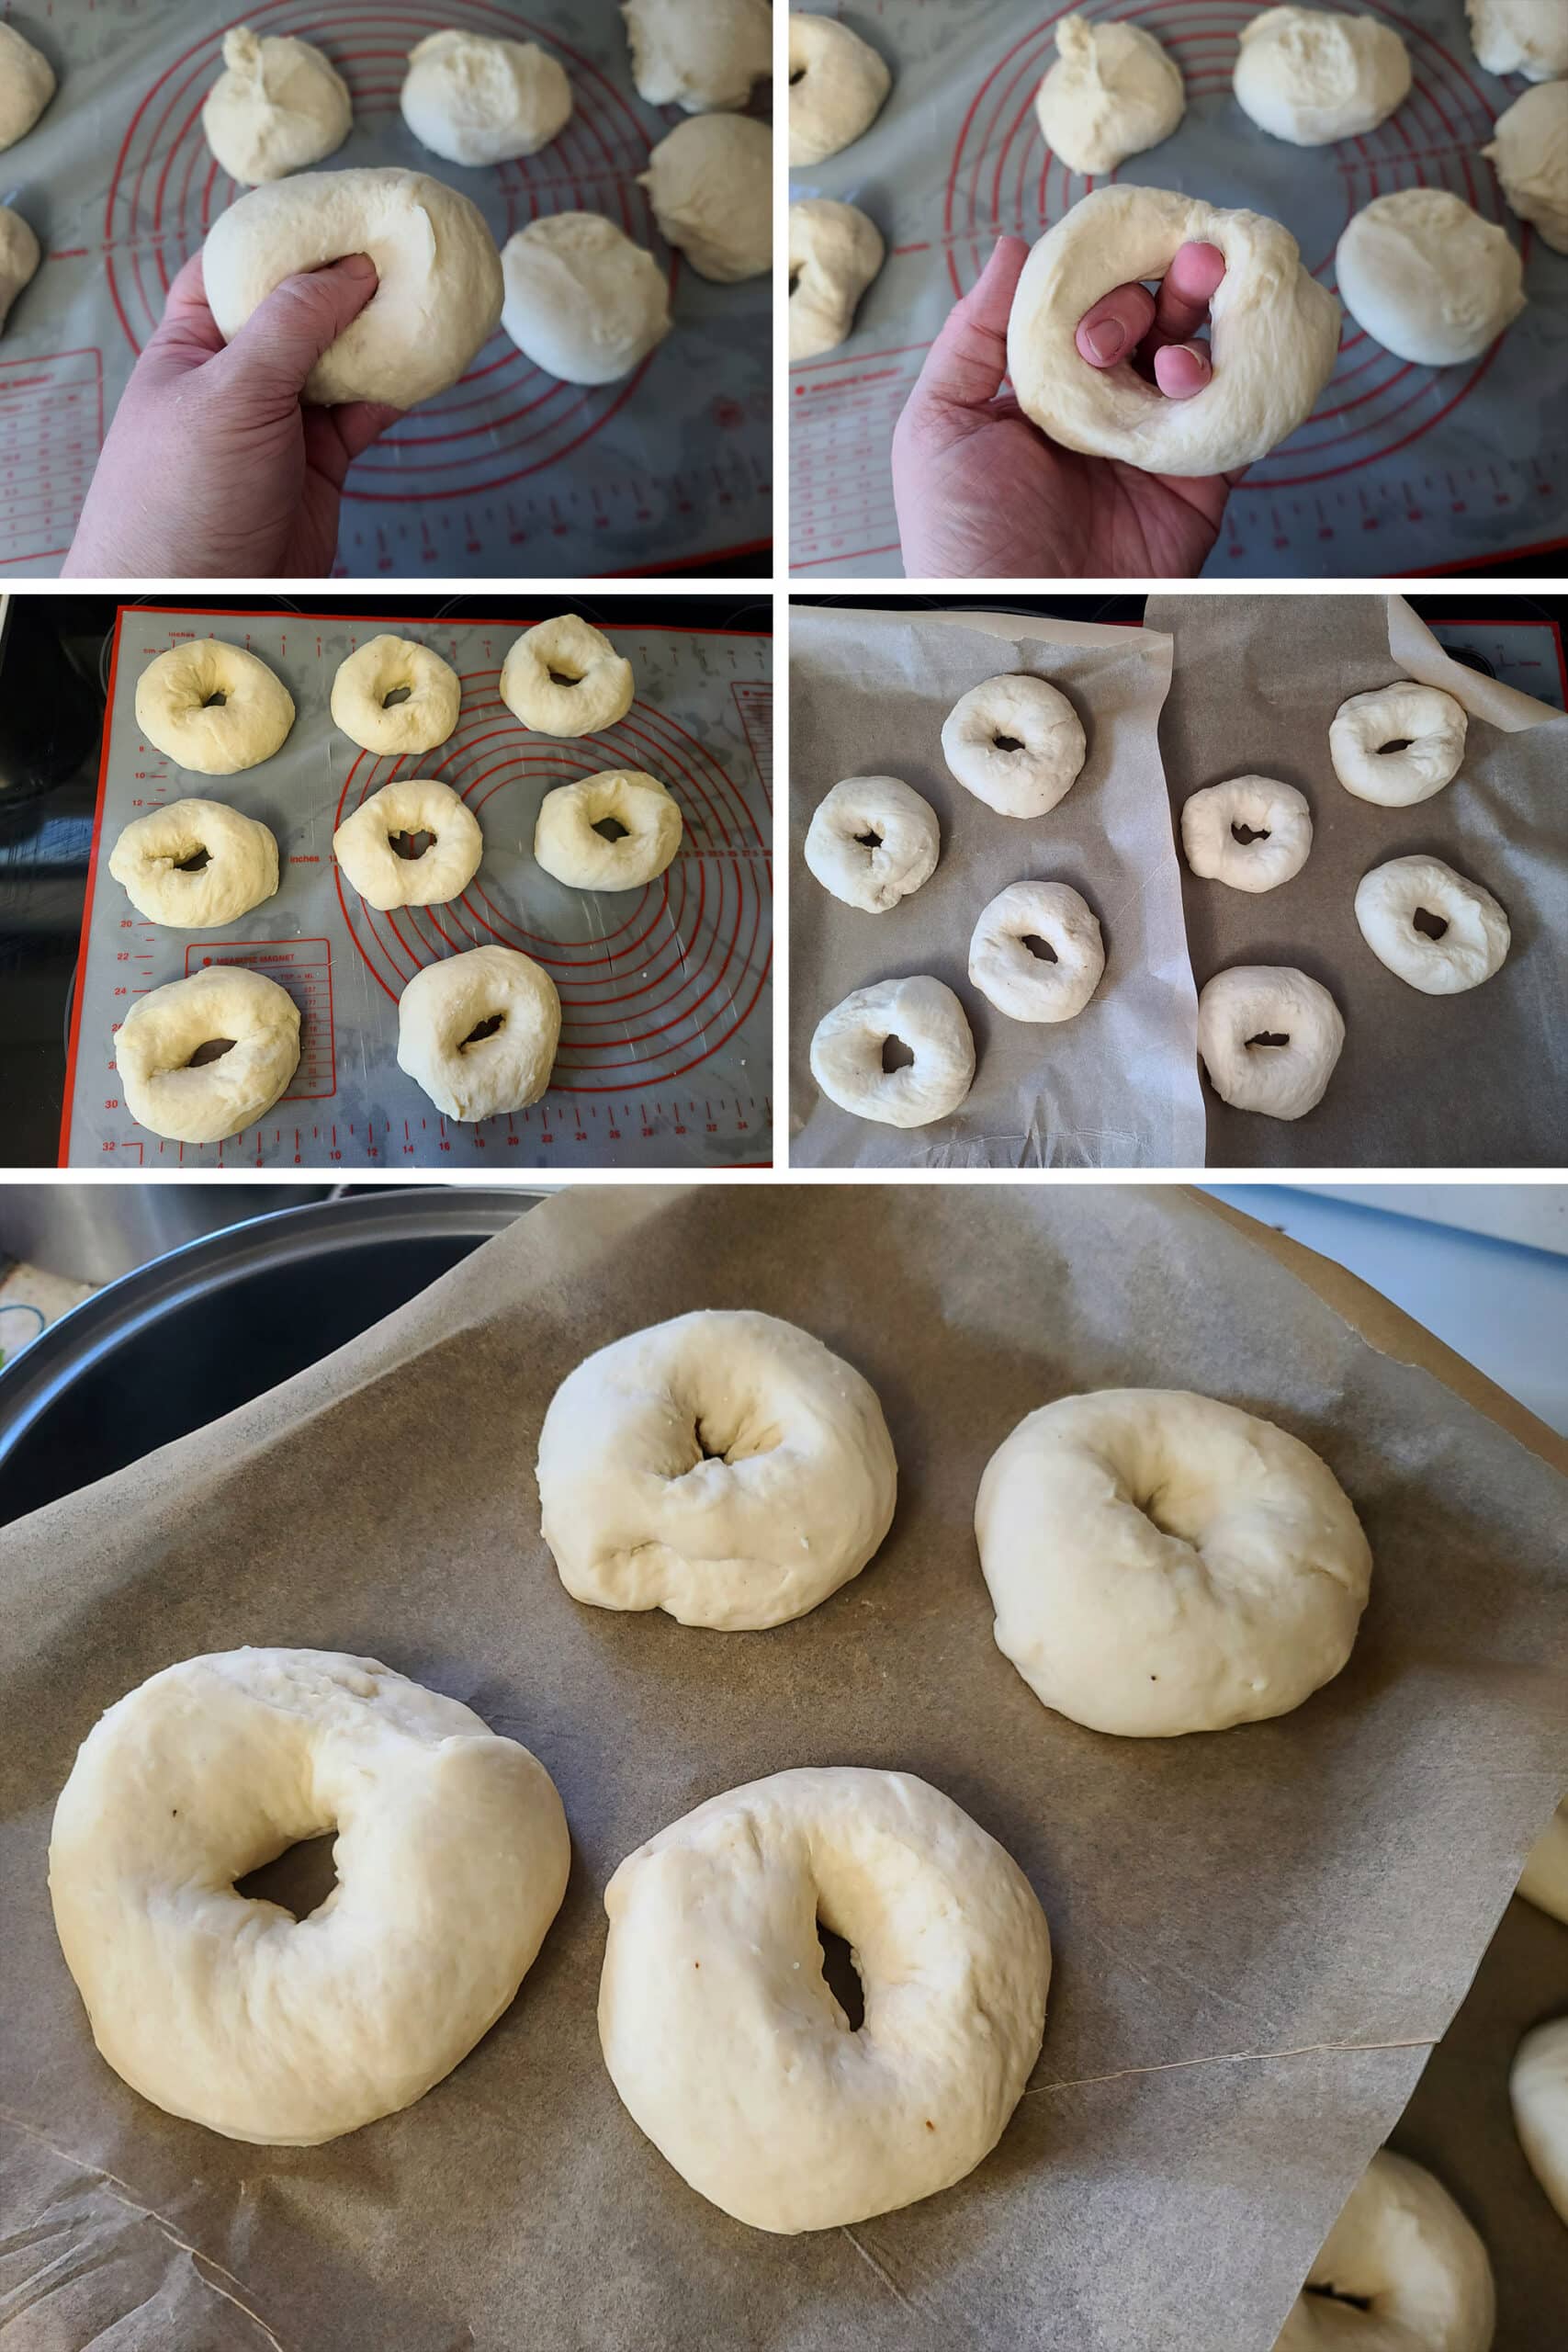 A 5 part image showing the garlic asiago dough being formed into bagels and placed on 2 parchment lined baking sheets.